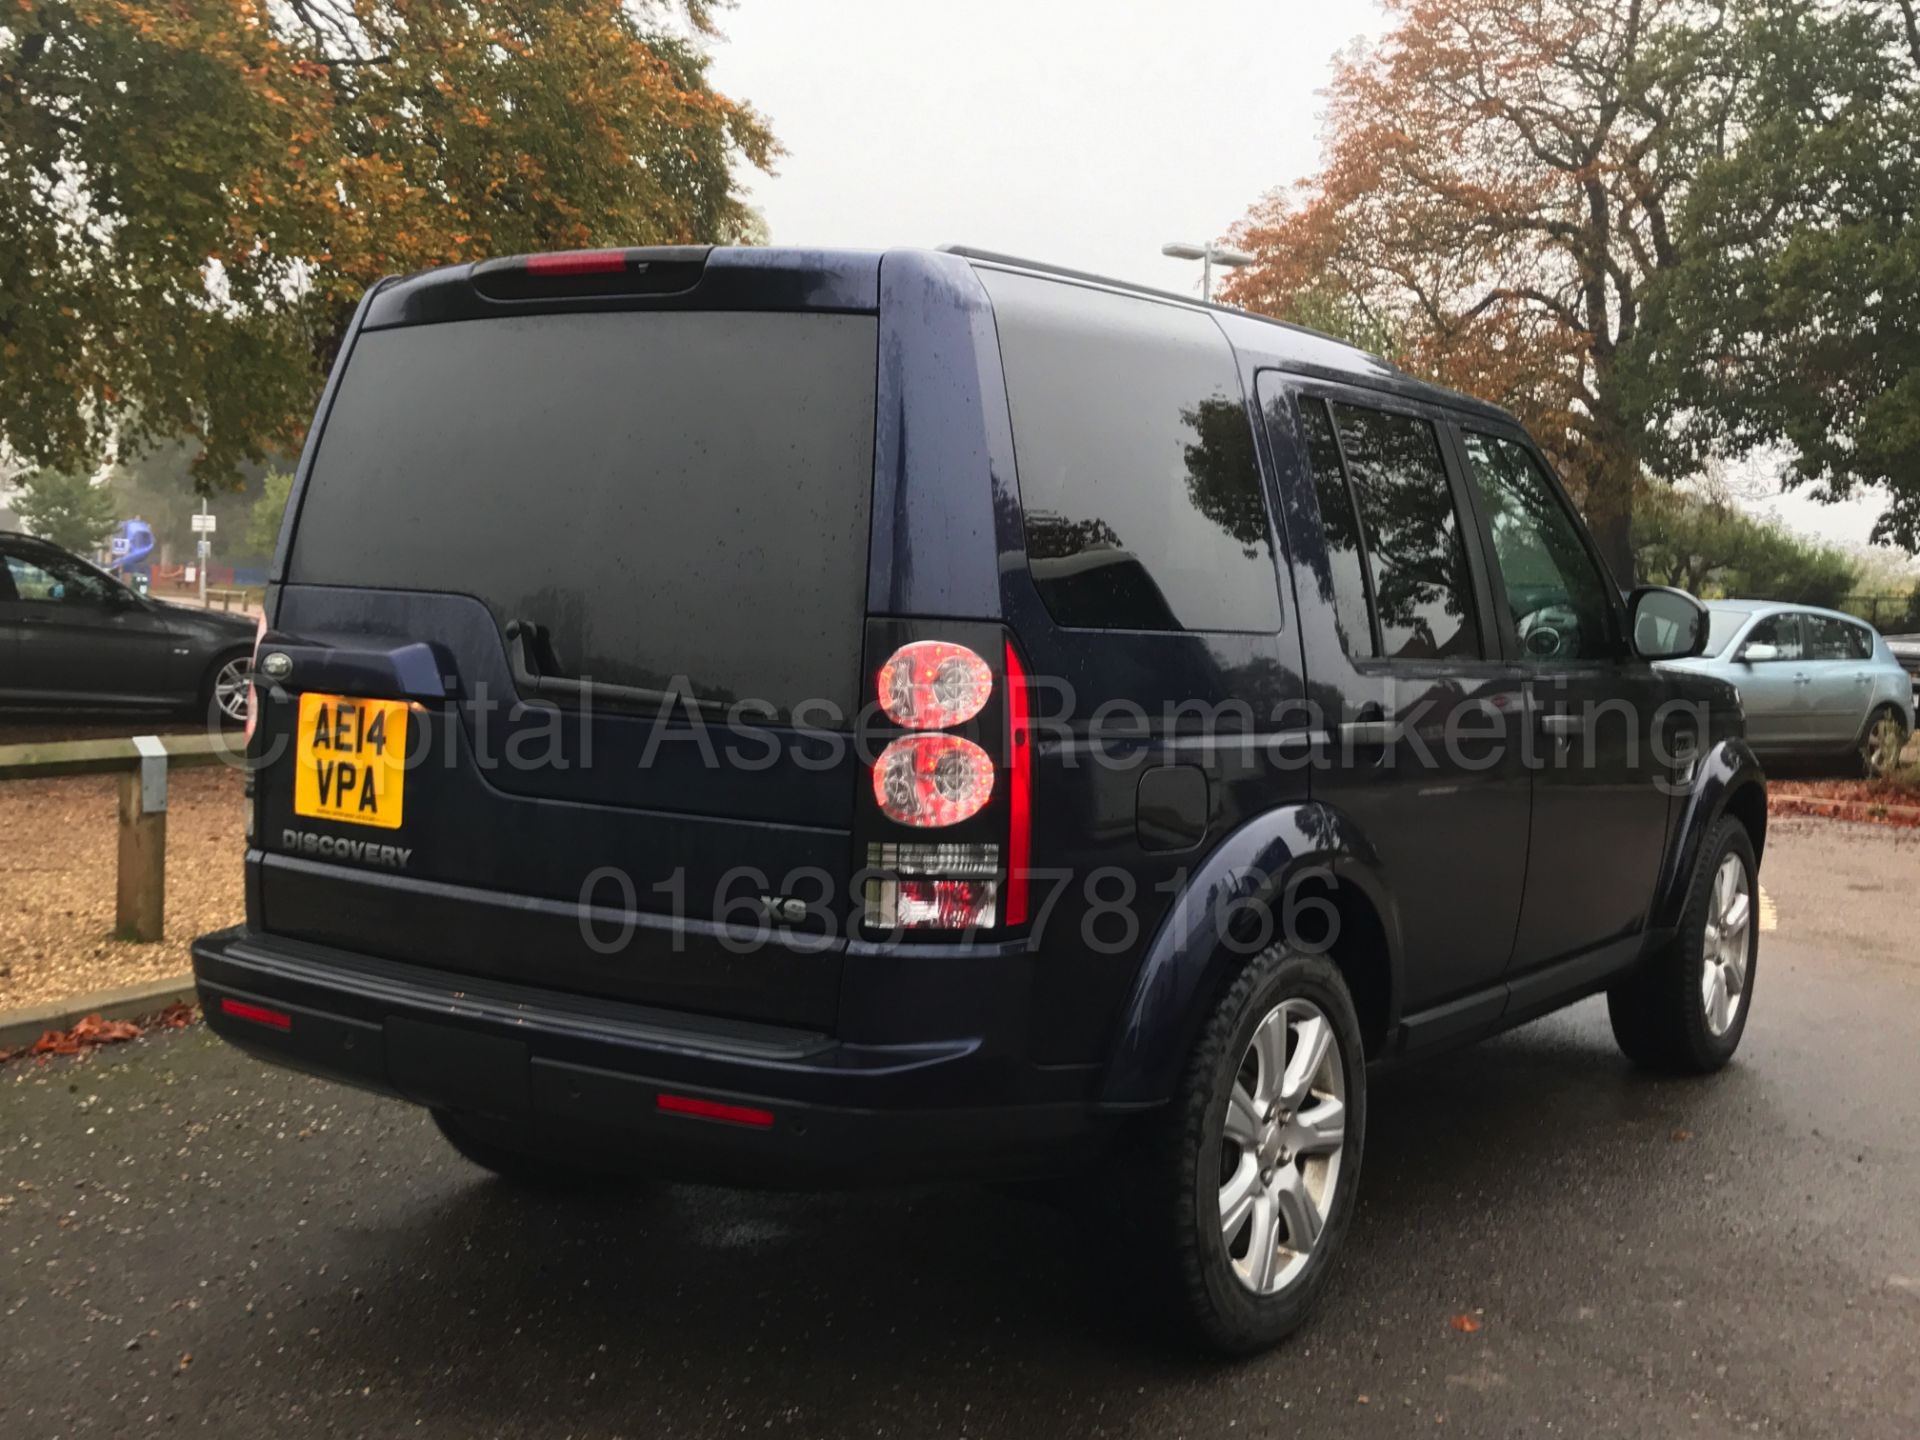 ON SALE LAND ROVER DISCOVERY 4 (2014) '3.0 SDV6 - 8 SPEED AUTO - LEATHER - SAT NAV -7 SEATER'1 OWNER - Image 9 of 41